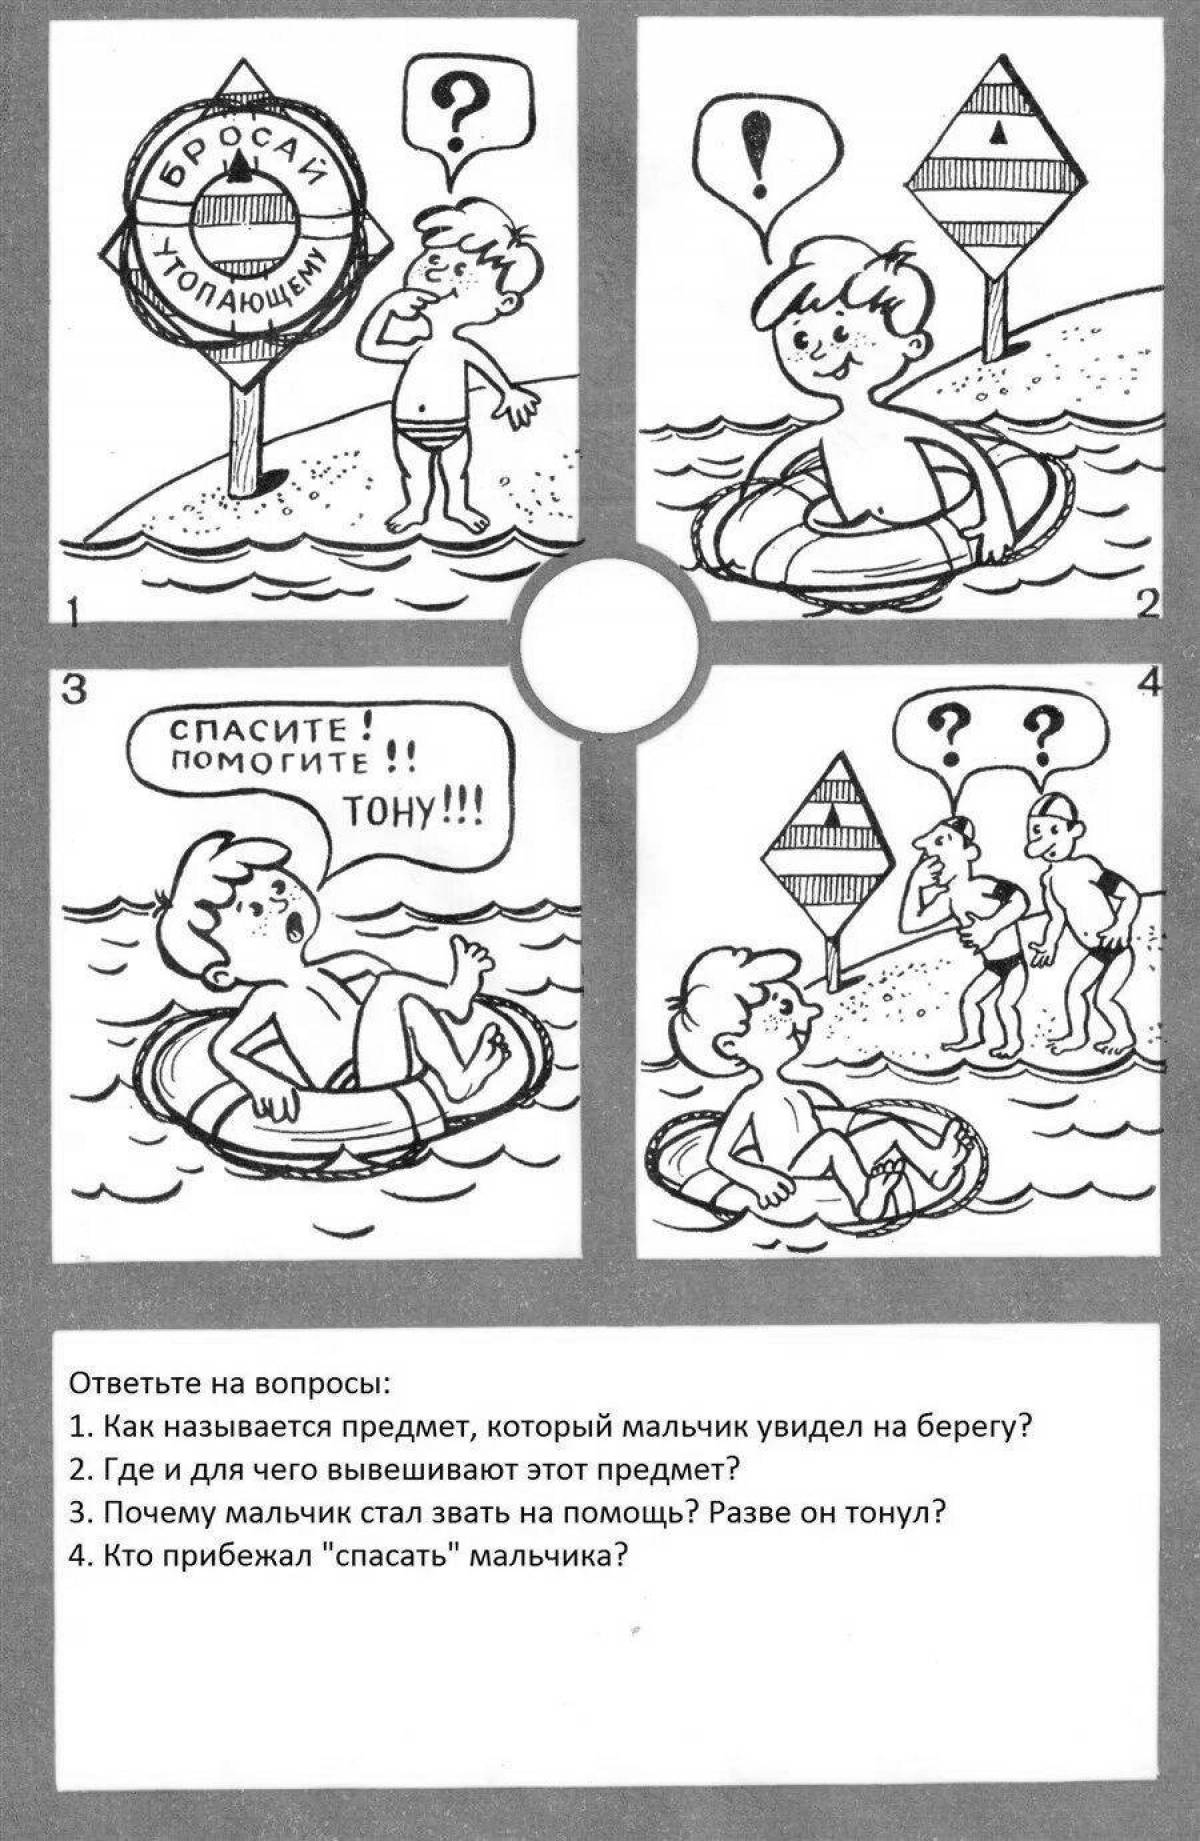 Water safety #2